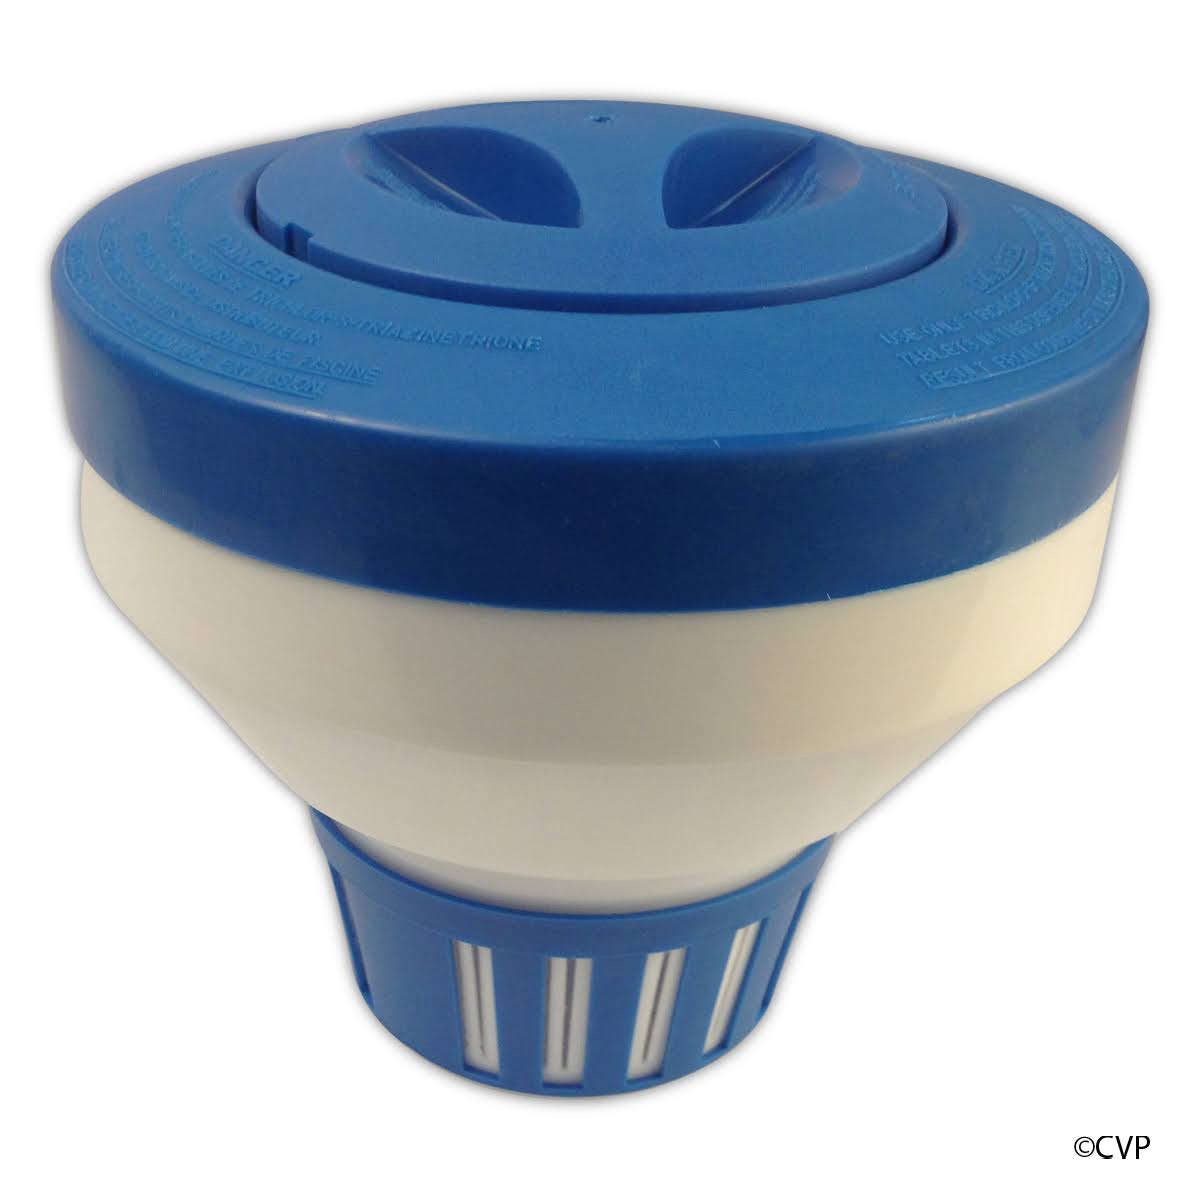 Pool Style Chemical Dispenser for Tablets - Blue and White, 3"